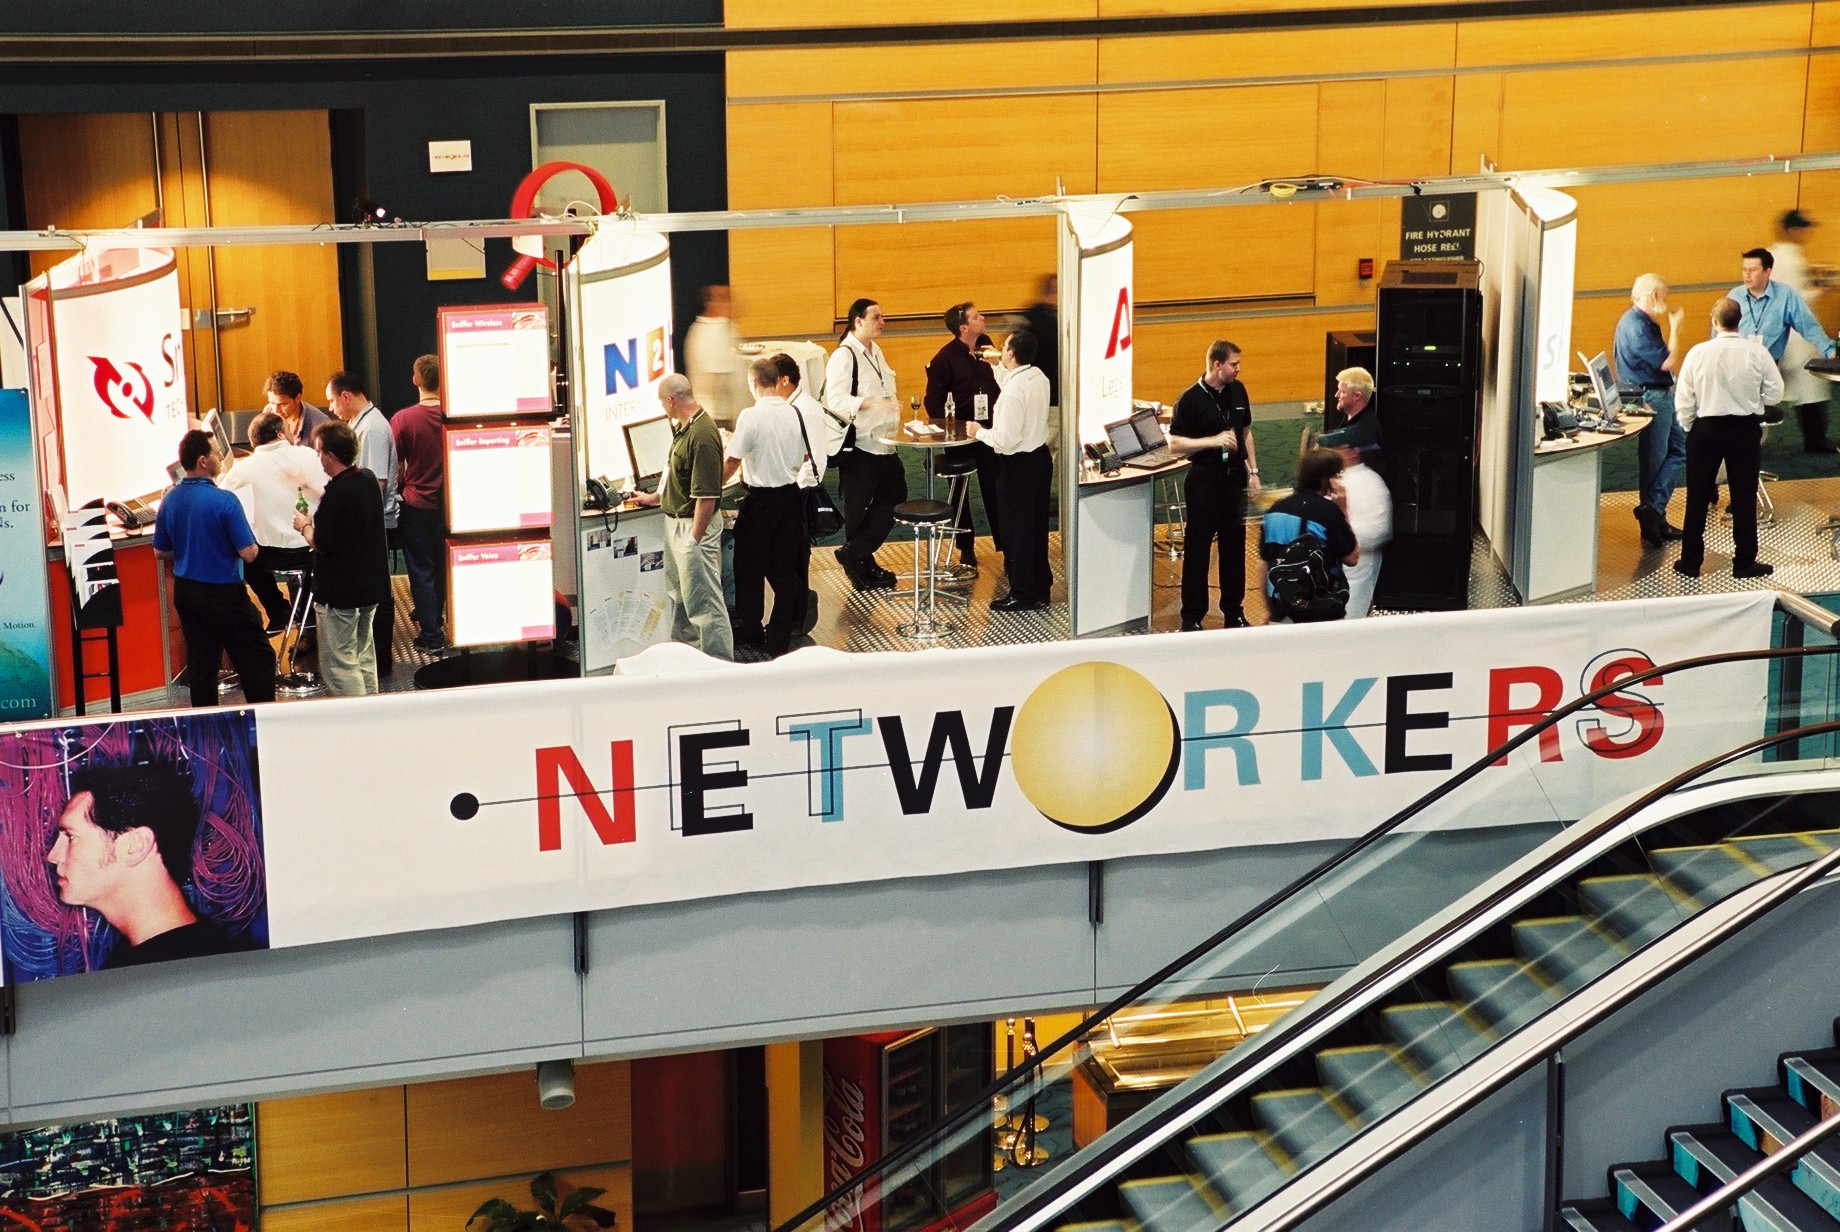 A banner reads "networkers" in funky font as conference attendees mill between booths at Networkers